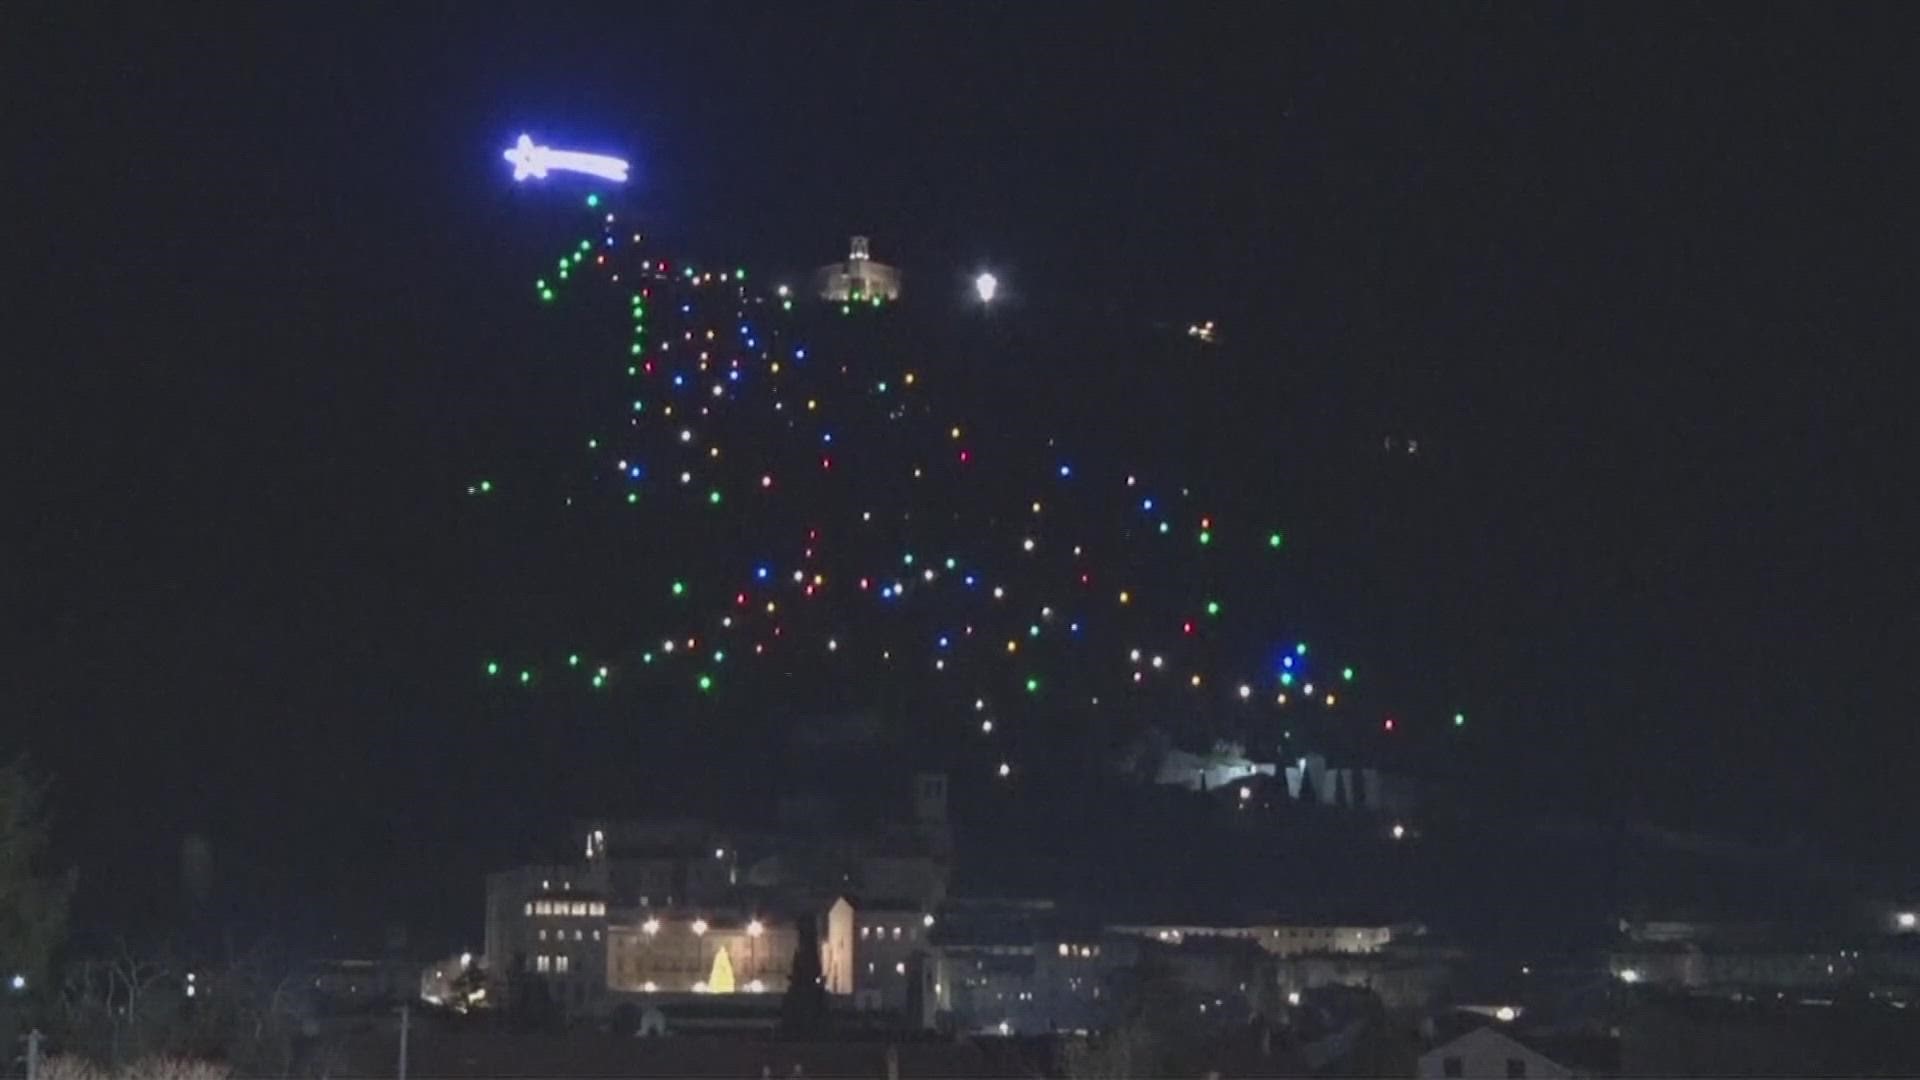 The tree-shaped lights, spread out on the Ingino Hill in Gubbio, are nearly a half-mile tall with more than 5 miles of lights.